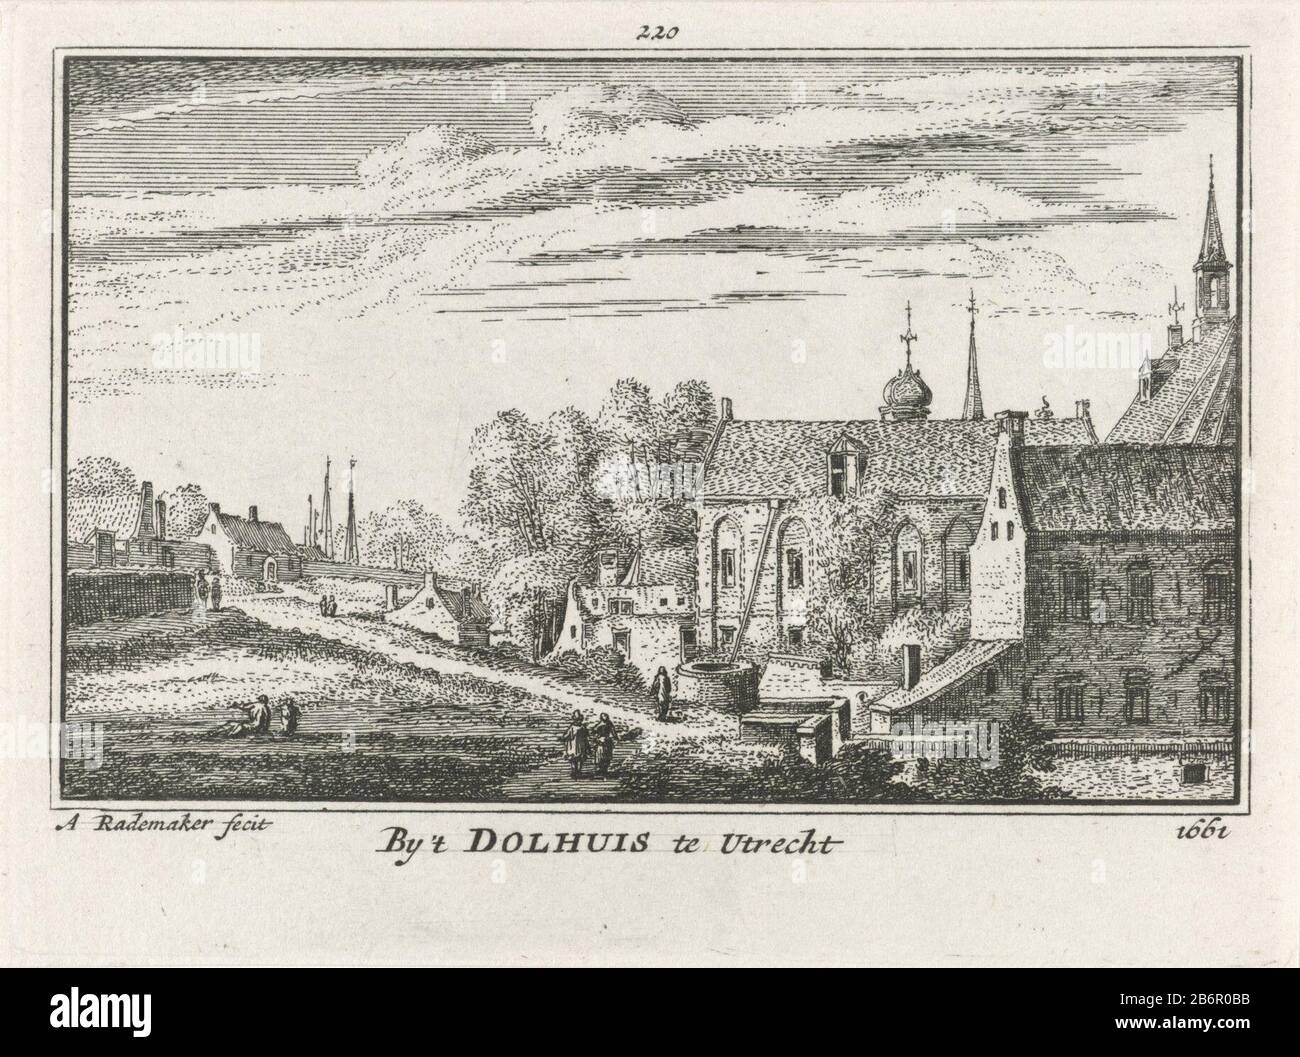 Gezicht op de stadswal bij het dolhuis en het St-Agnietenklooster te Utrecht, 1661 By 't Dolhuis te Utrecht 1661 (titel op object) View of the city wall in the madhouse and the St. Saint Agnes Convent in Utrecht, 1661By 't Dolhuis Utrecht 1661 (title object) Object type: picture book illustration Item number: RP-P-OB-73.572 Inscriptions / brands: collector's mark, verso, stamped: Lugt 2228opschrift, verso, wrote: 'it Dolhuis [...] 'Description: View from the ramparts of the madhouse and the St. Saint Agnes Convent in Utrecht in the courtyard, in the situation around 1661 . In the foreground, a Stock Photo